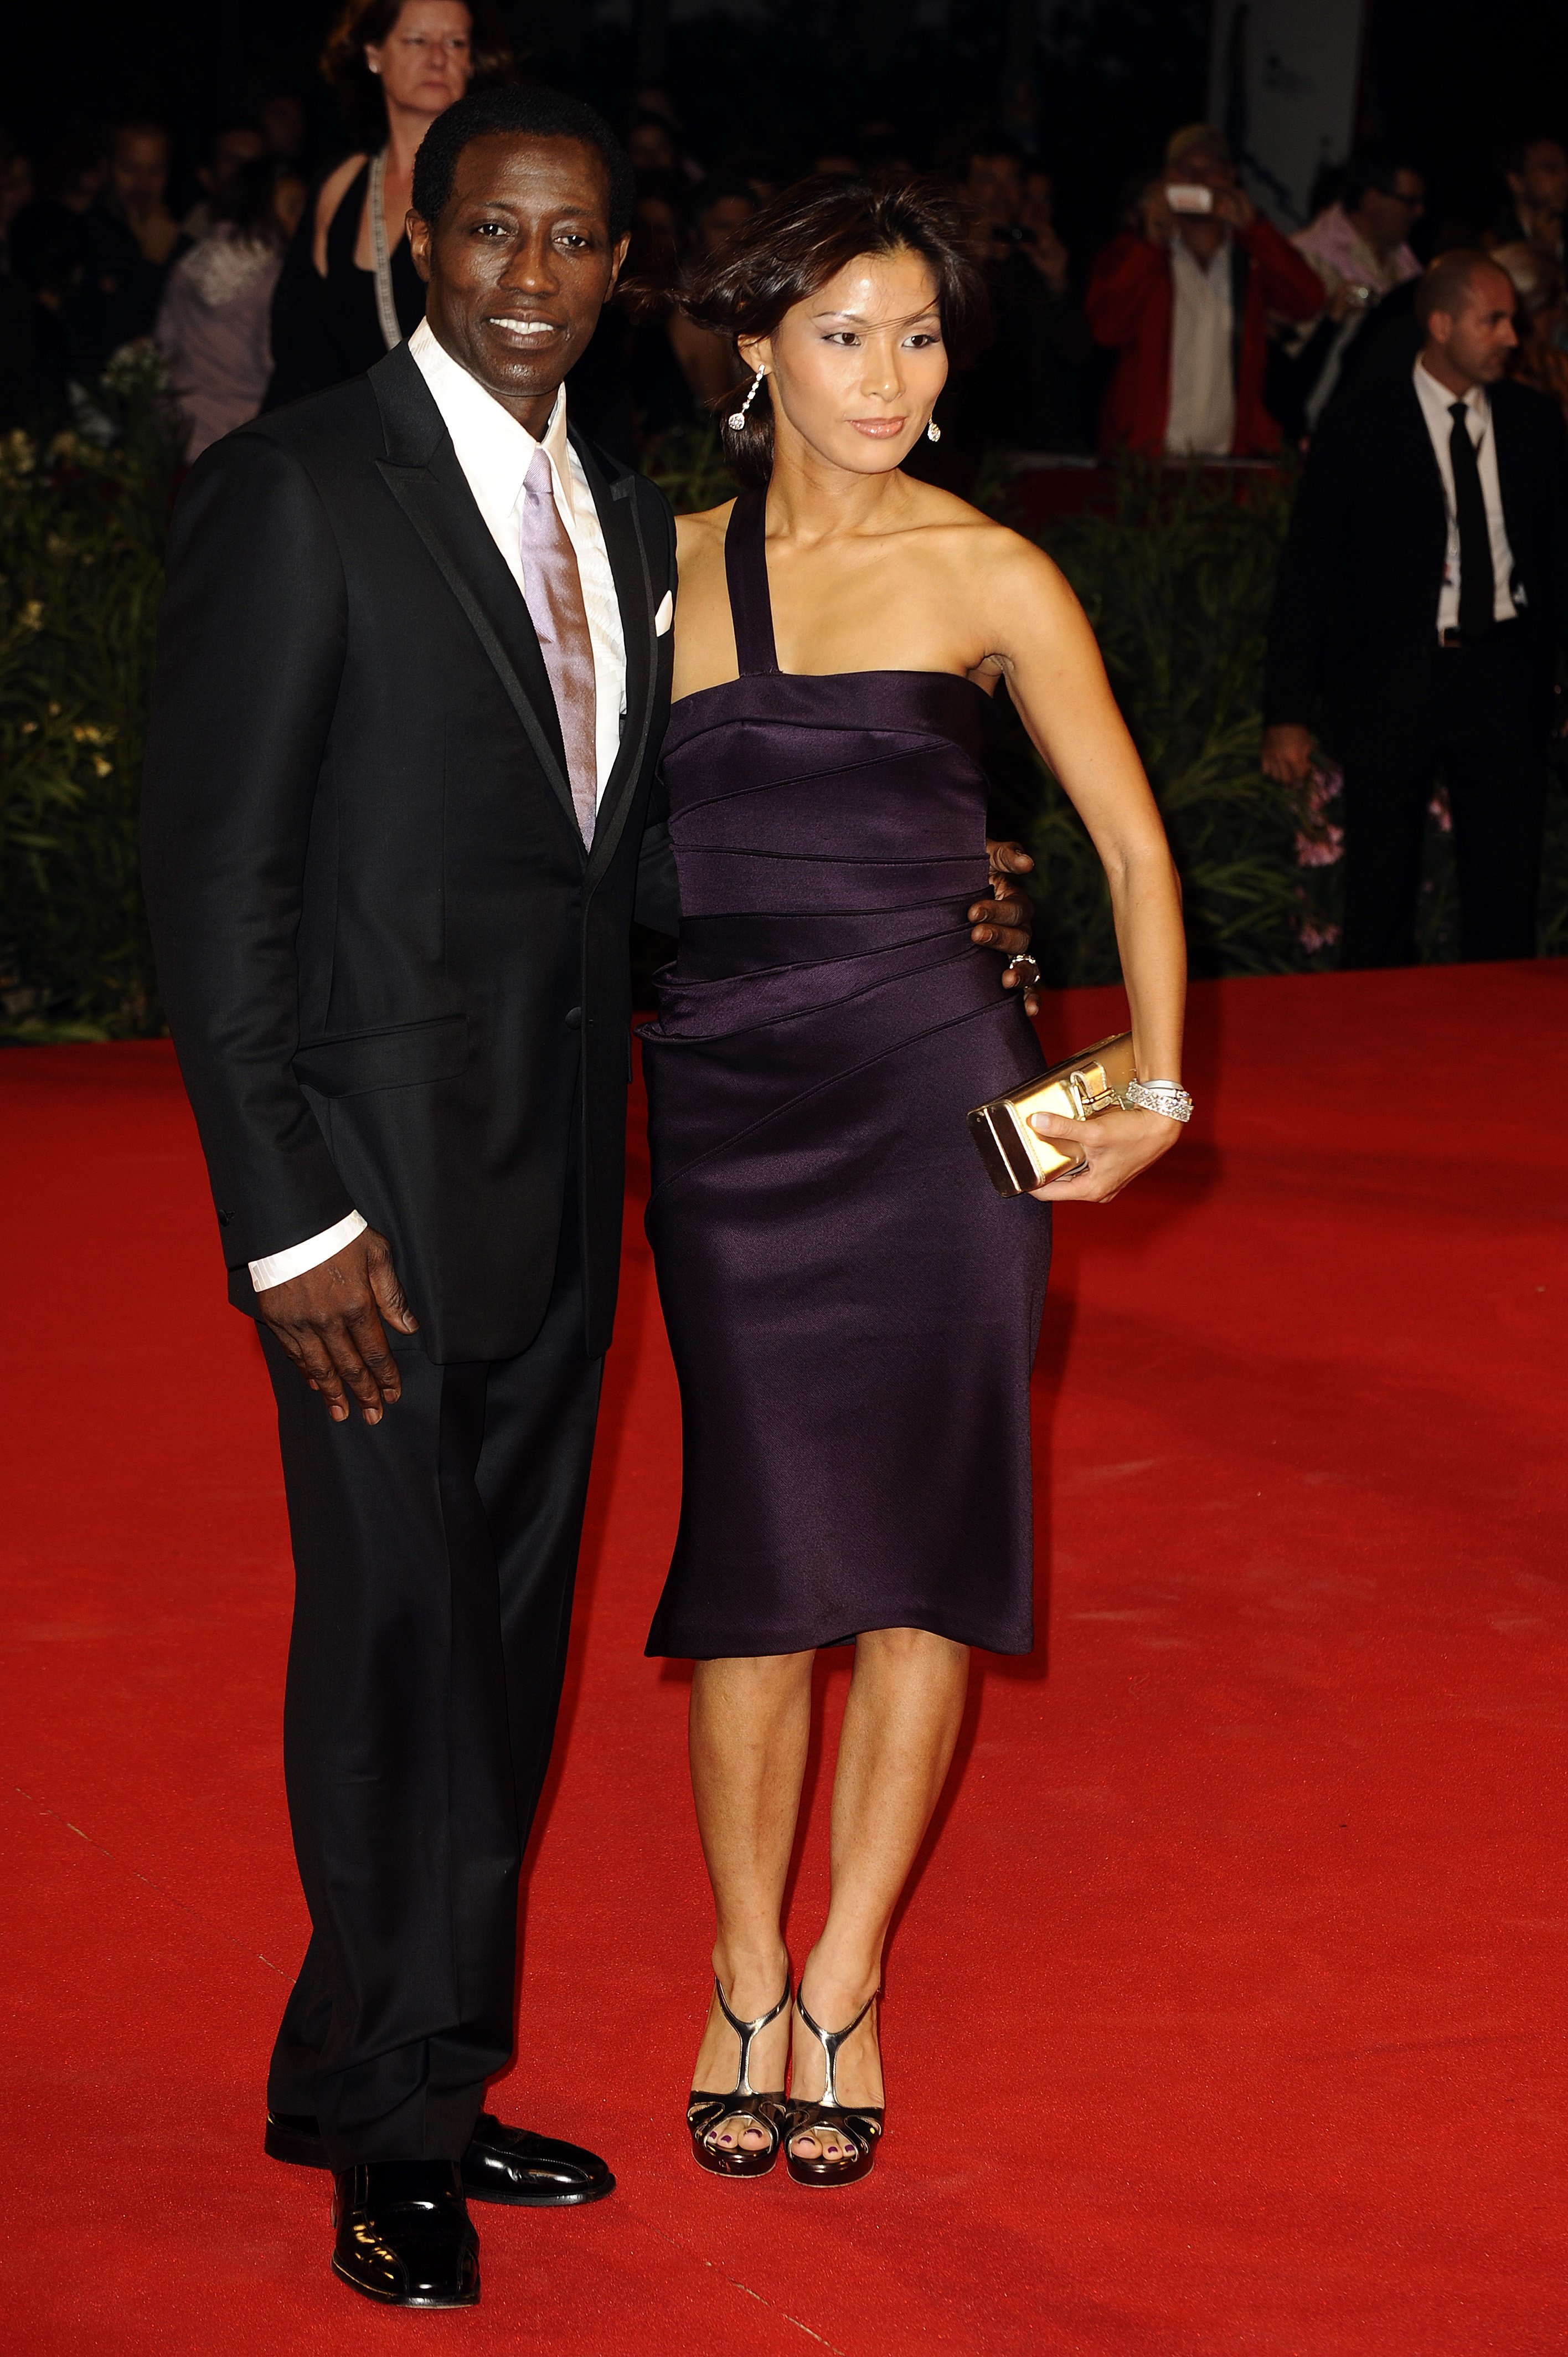 Nakyung Park and Wesley Snipes attend the 66th Venice Film Festival on September 8, 2009, in Venice, Italy. | Source: Getty Images